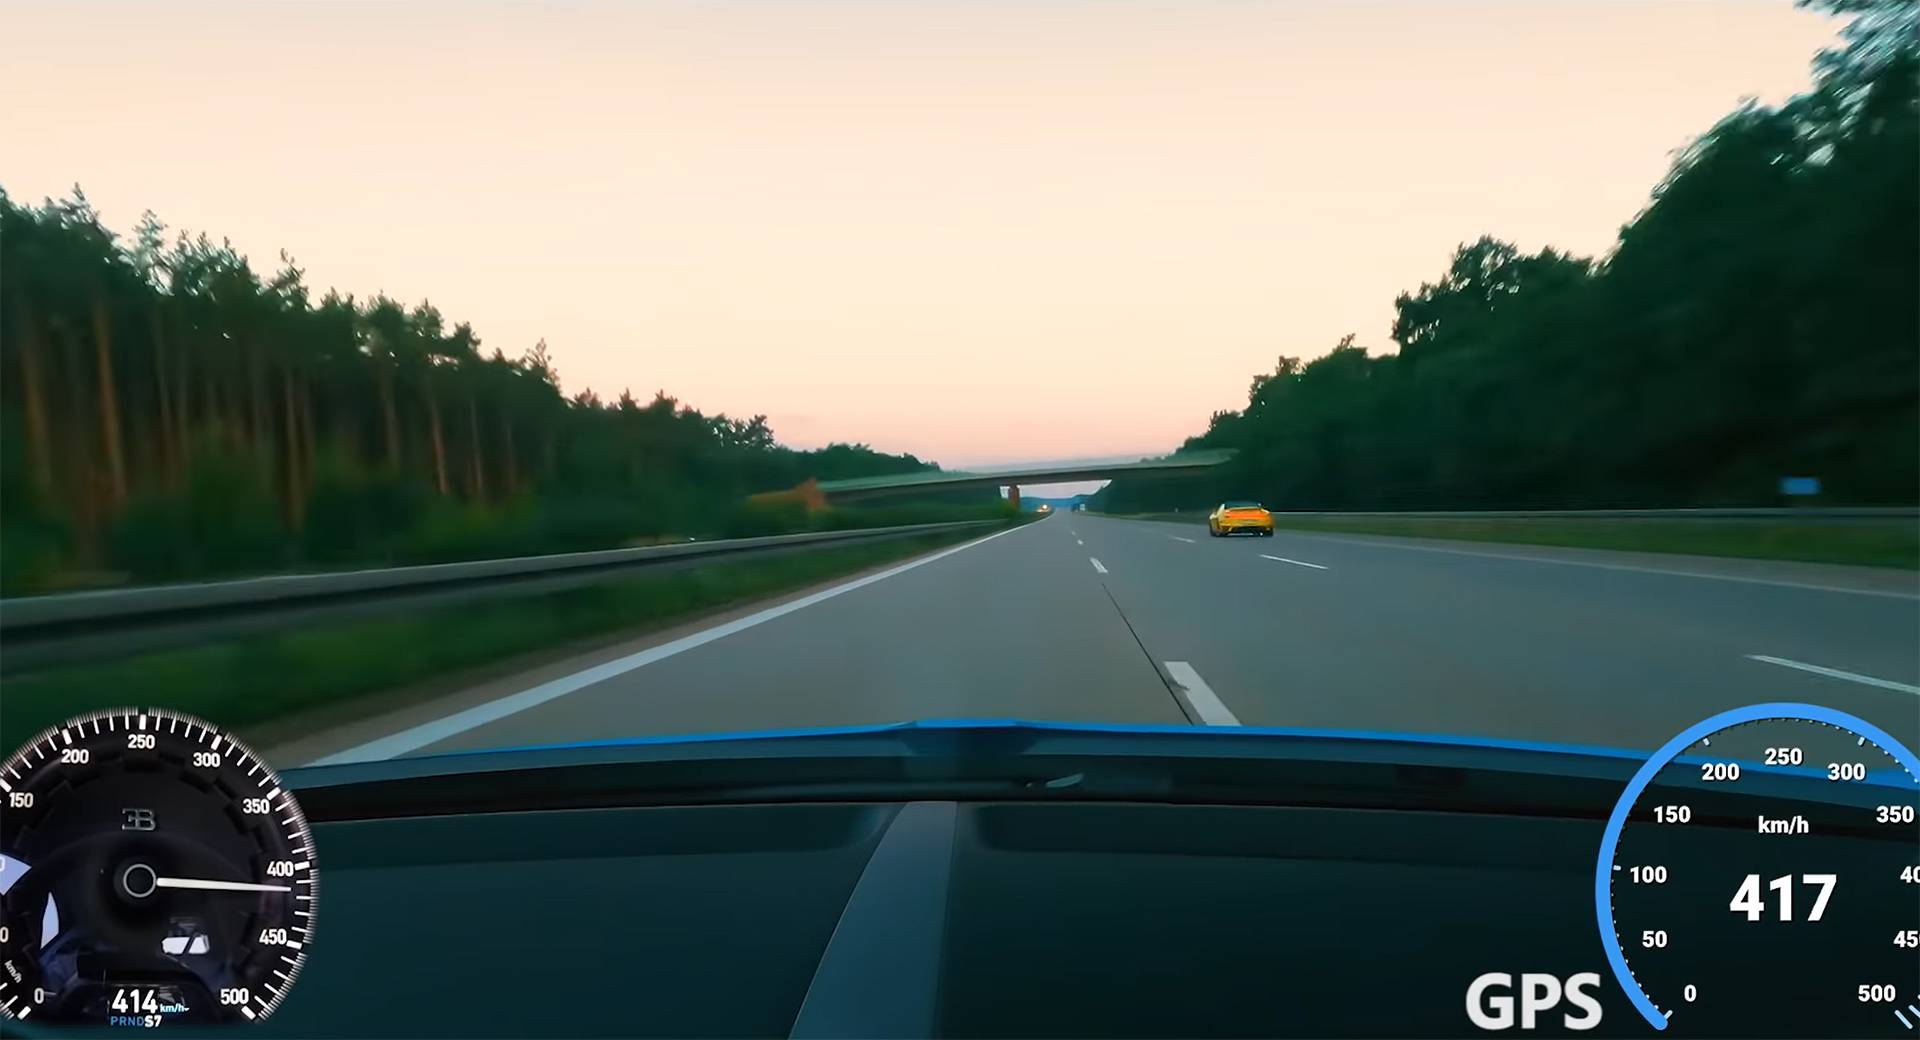 Relive A Bugatti Chiron Doing 259 MPH The Autobahn, Now With GPS-Verified Speed | Carscoops